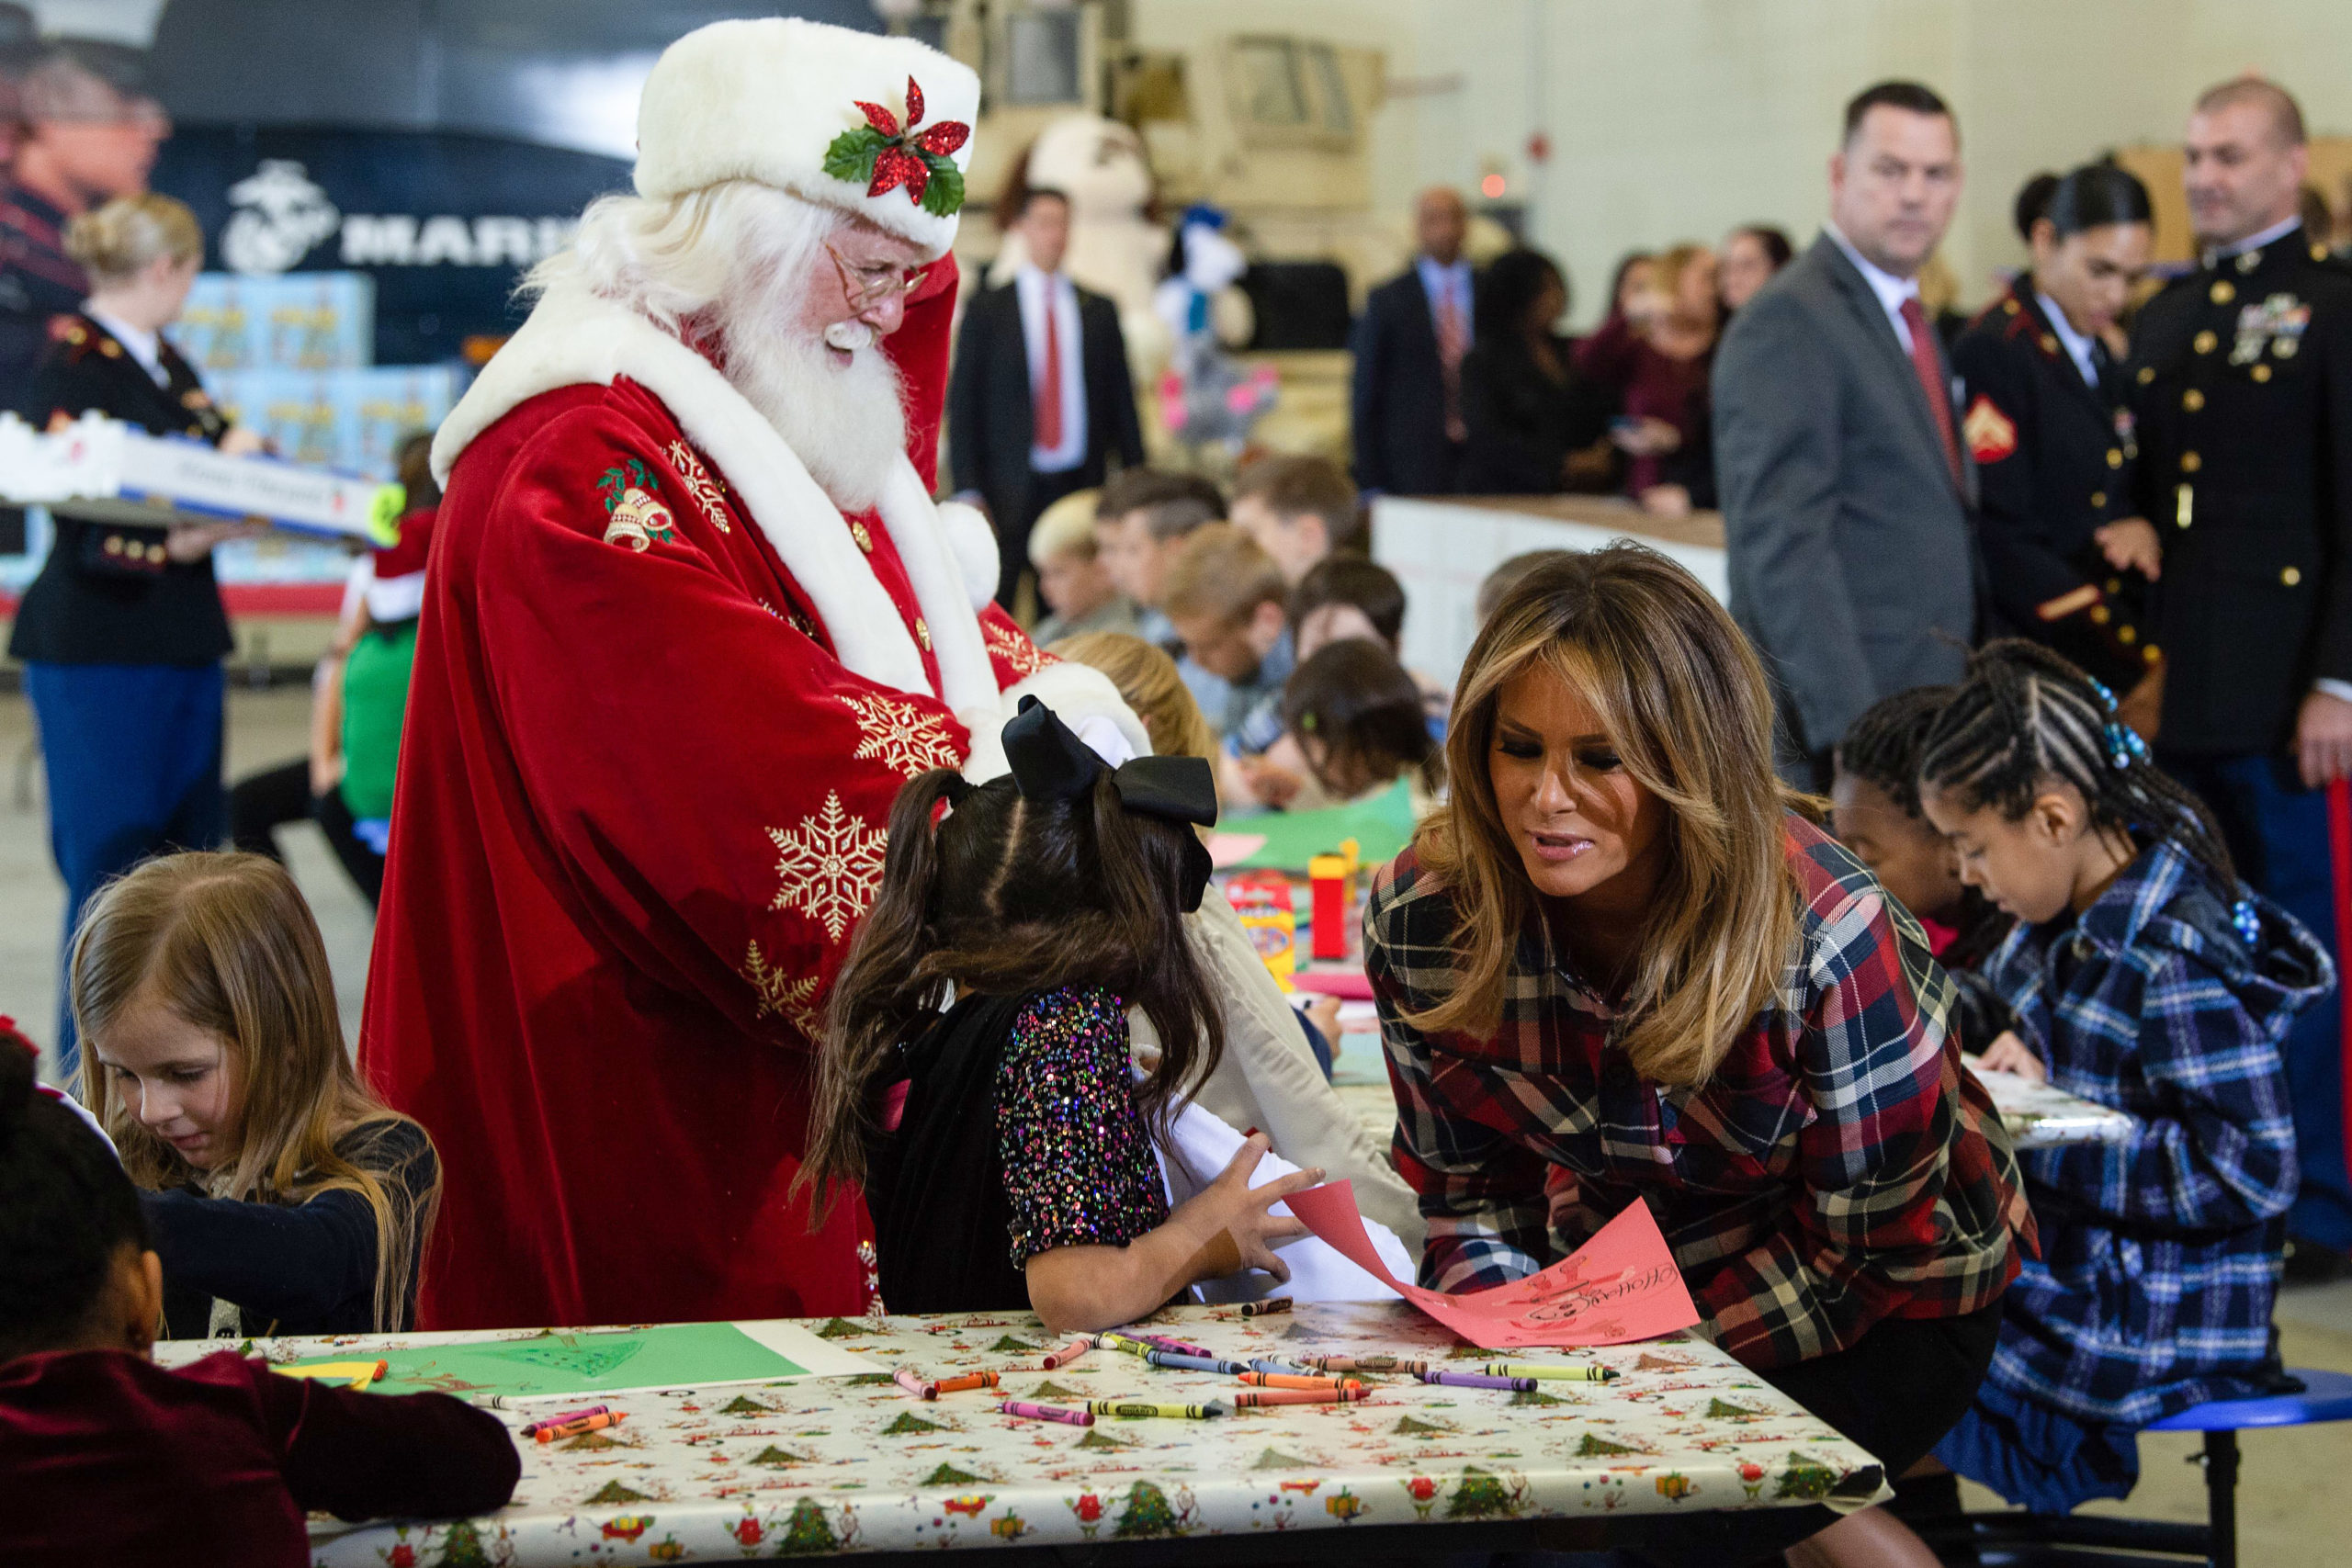 US First Lady Melania Trump attends with Father Christmas personificator a Toys for Tots event at Joint Base Anacostia-Bolling in Washington, DC, on December 11, 2018. - Toys for Tots is a program run by the United States Marine Corps Reserve which distributes toys to children whose parents cannot afford to buy them gifts for Christmas. (Photo by NICHOLAS KAMM / AFP) (Photo credit should read NICHOLAS KAMM/AFP via Getty Images)